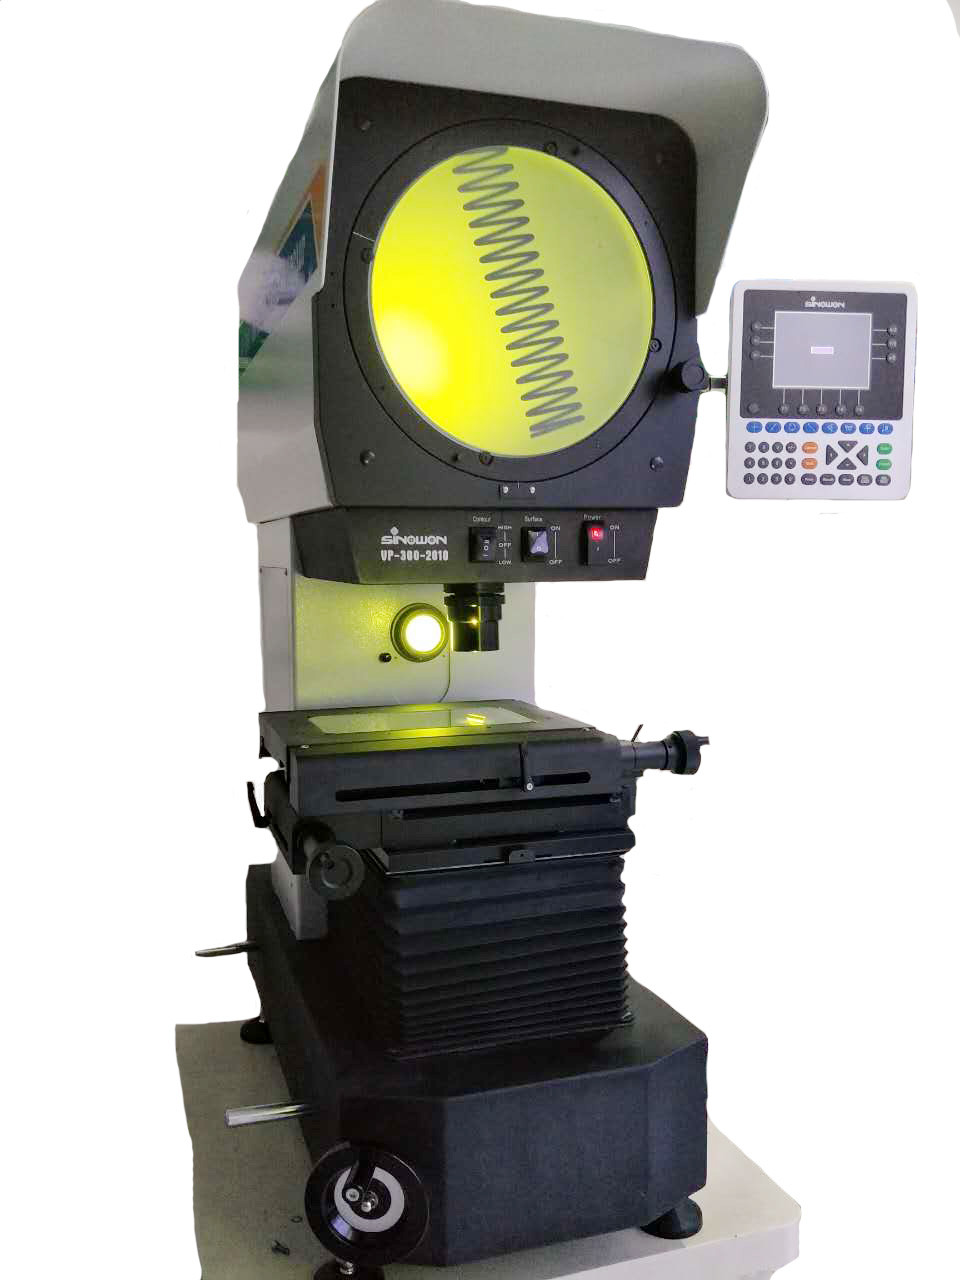  Measuring Spring φ300mm Screen Optical Profile Projector Big Fan Counter DP400 Manufactures